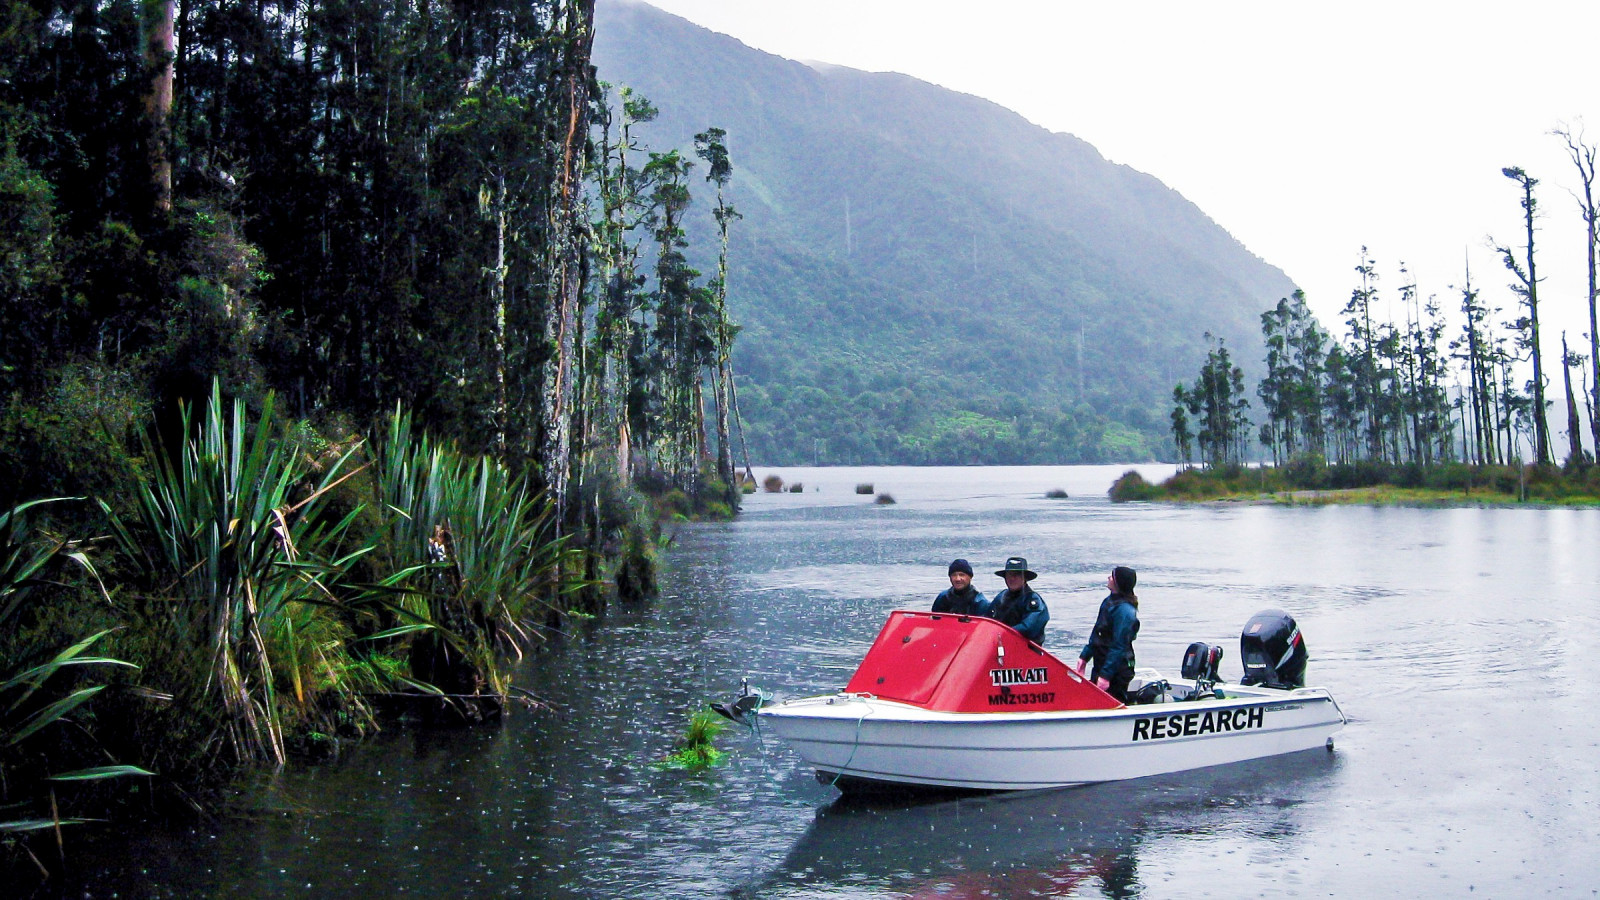 A small research motor boat with 3 people on board is stationery on a lake in the rain. Flax and tall native trees are in and beside the water.